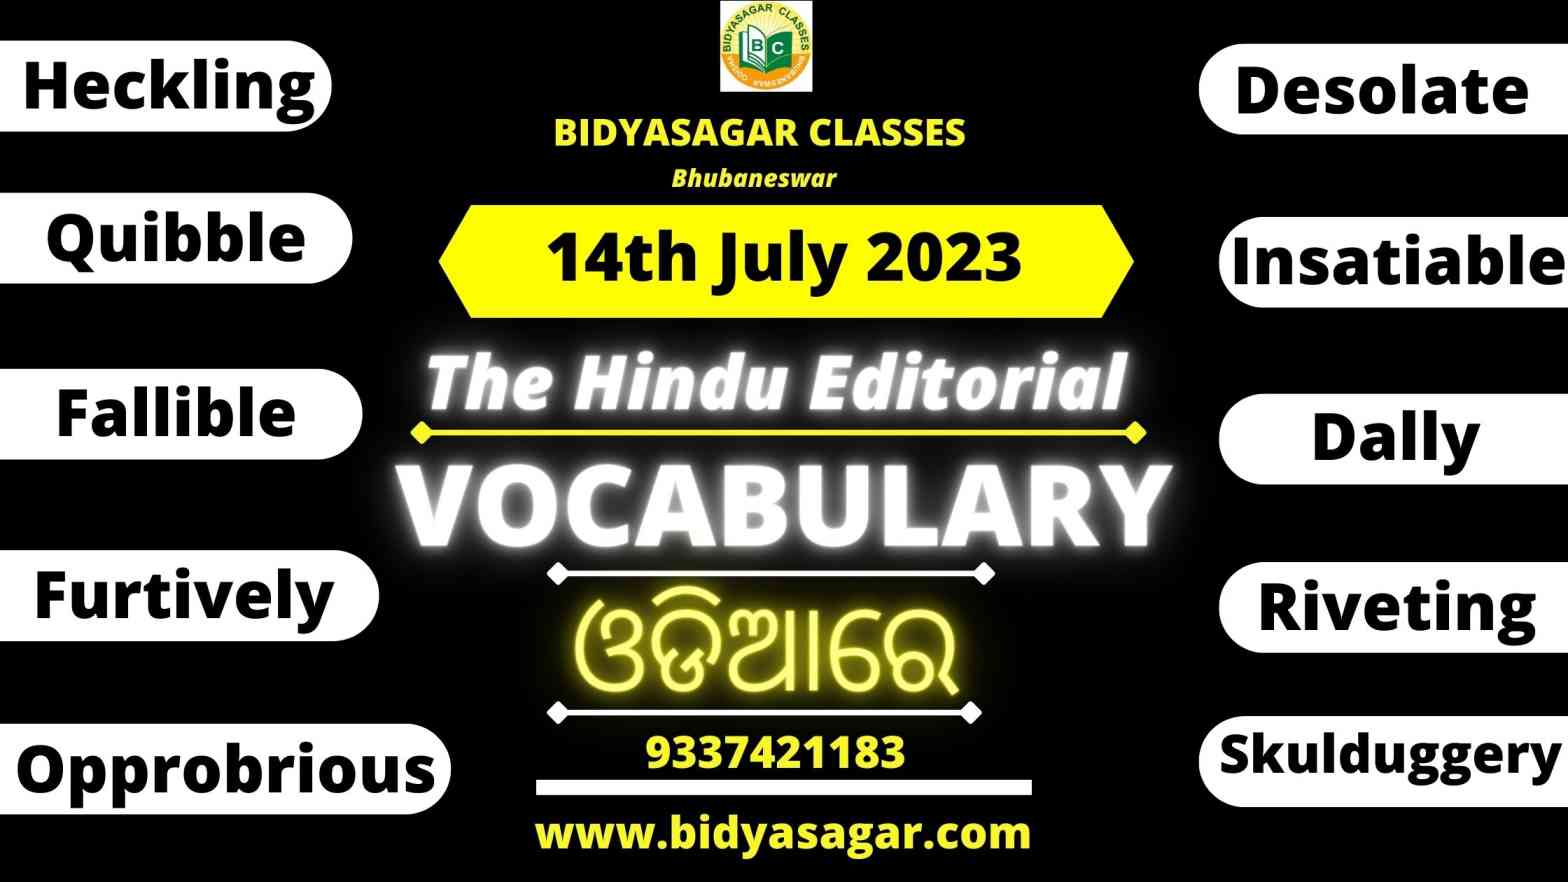 The Hindu Editorial Vocabulary of 14th July 2023